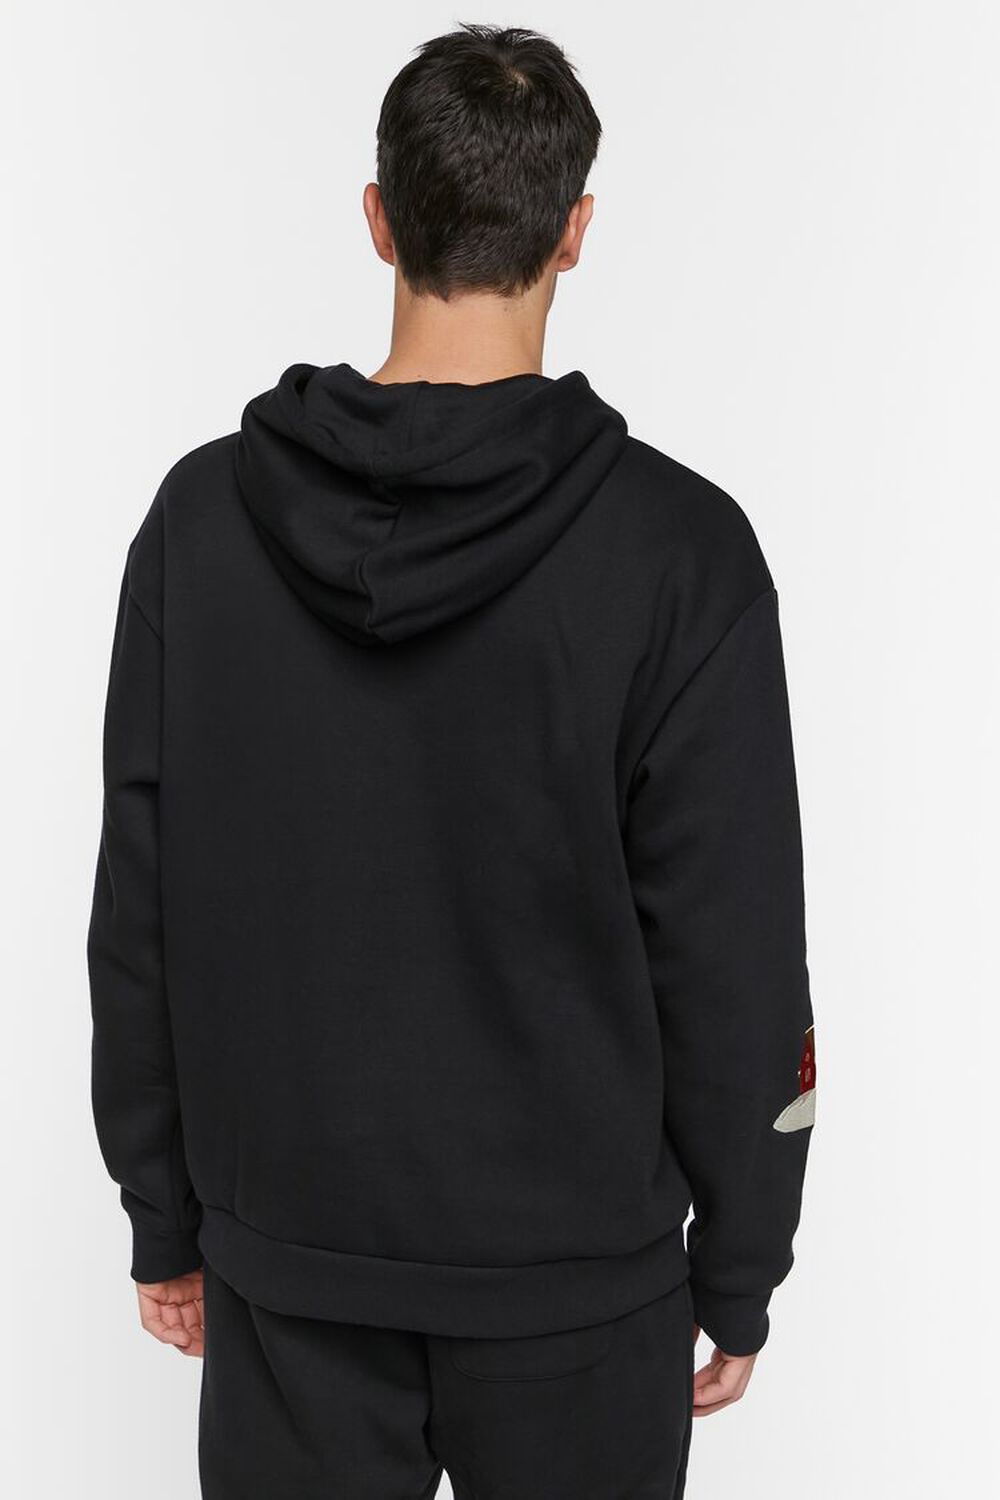 BLACK/MULTI Embroidered Cabin Hoodie, image 3